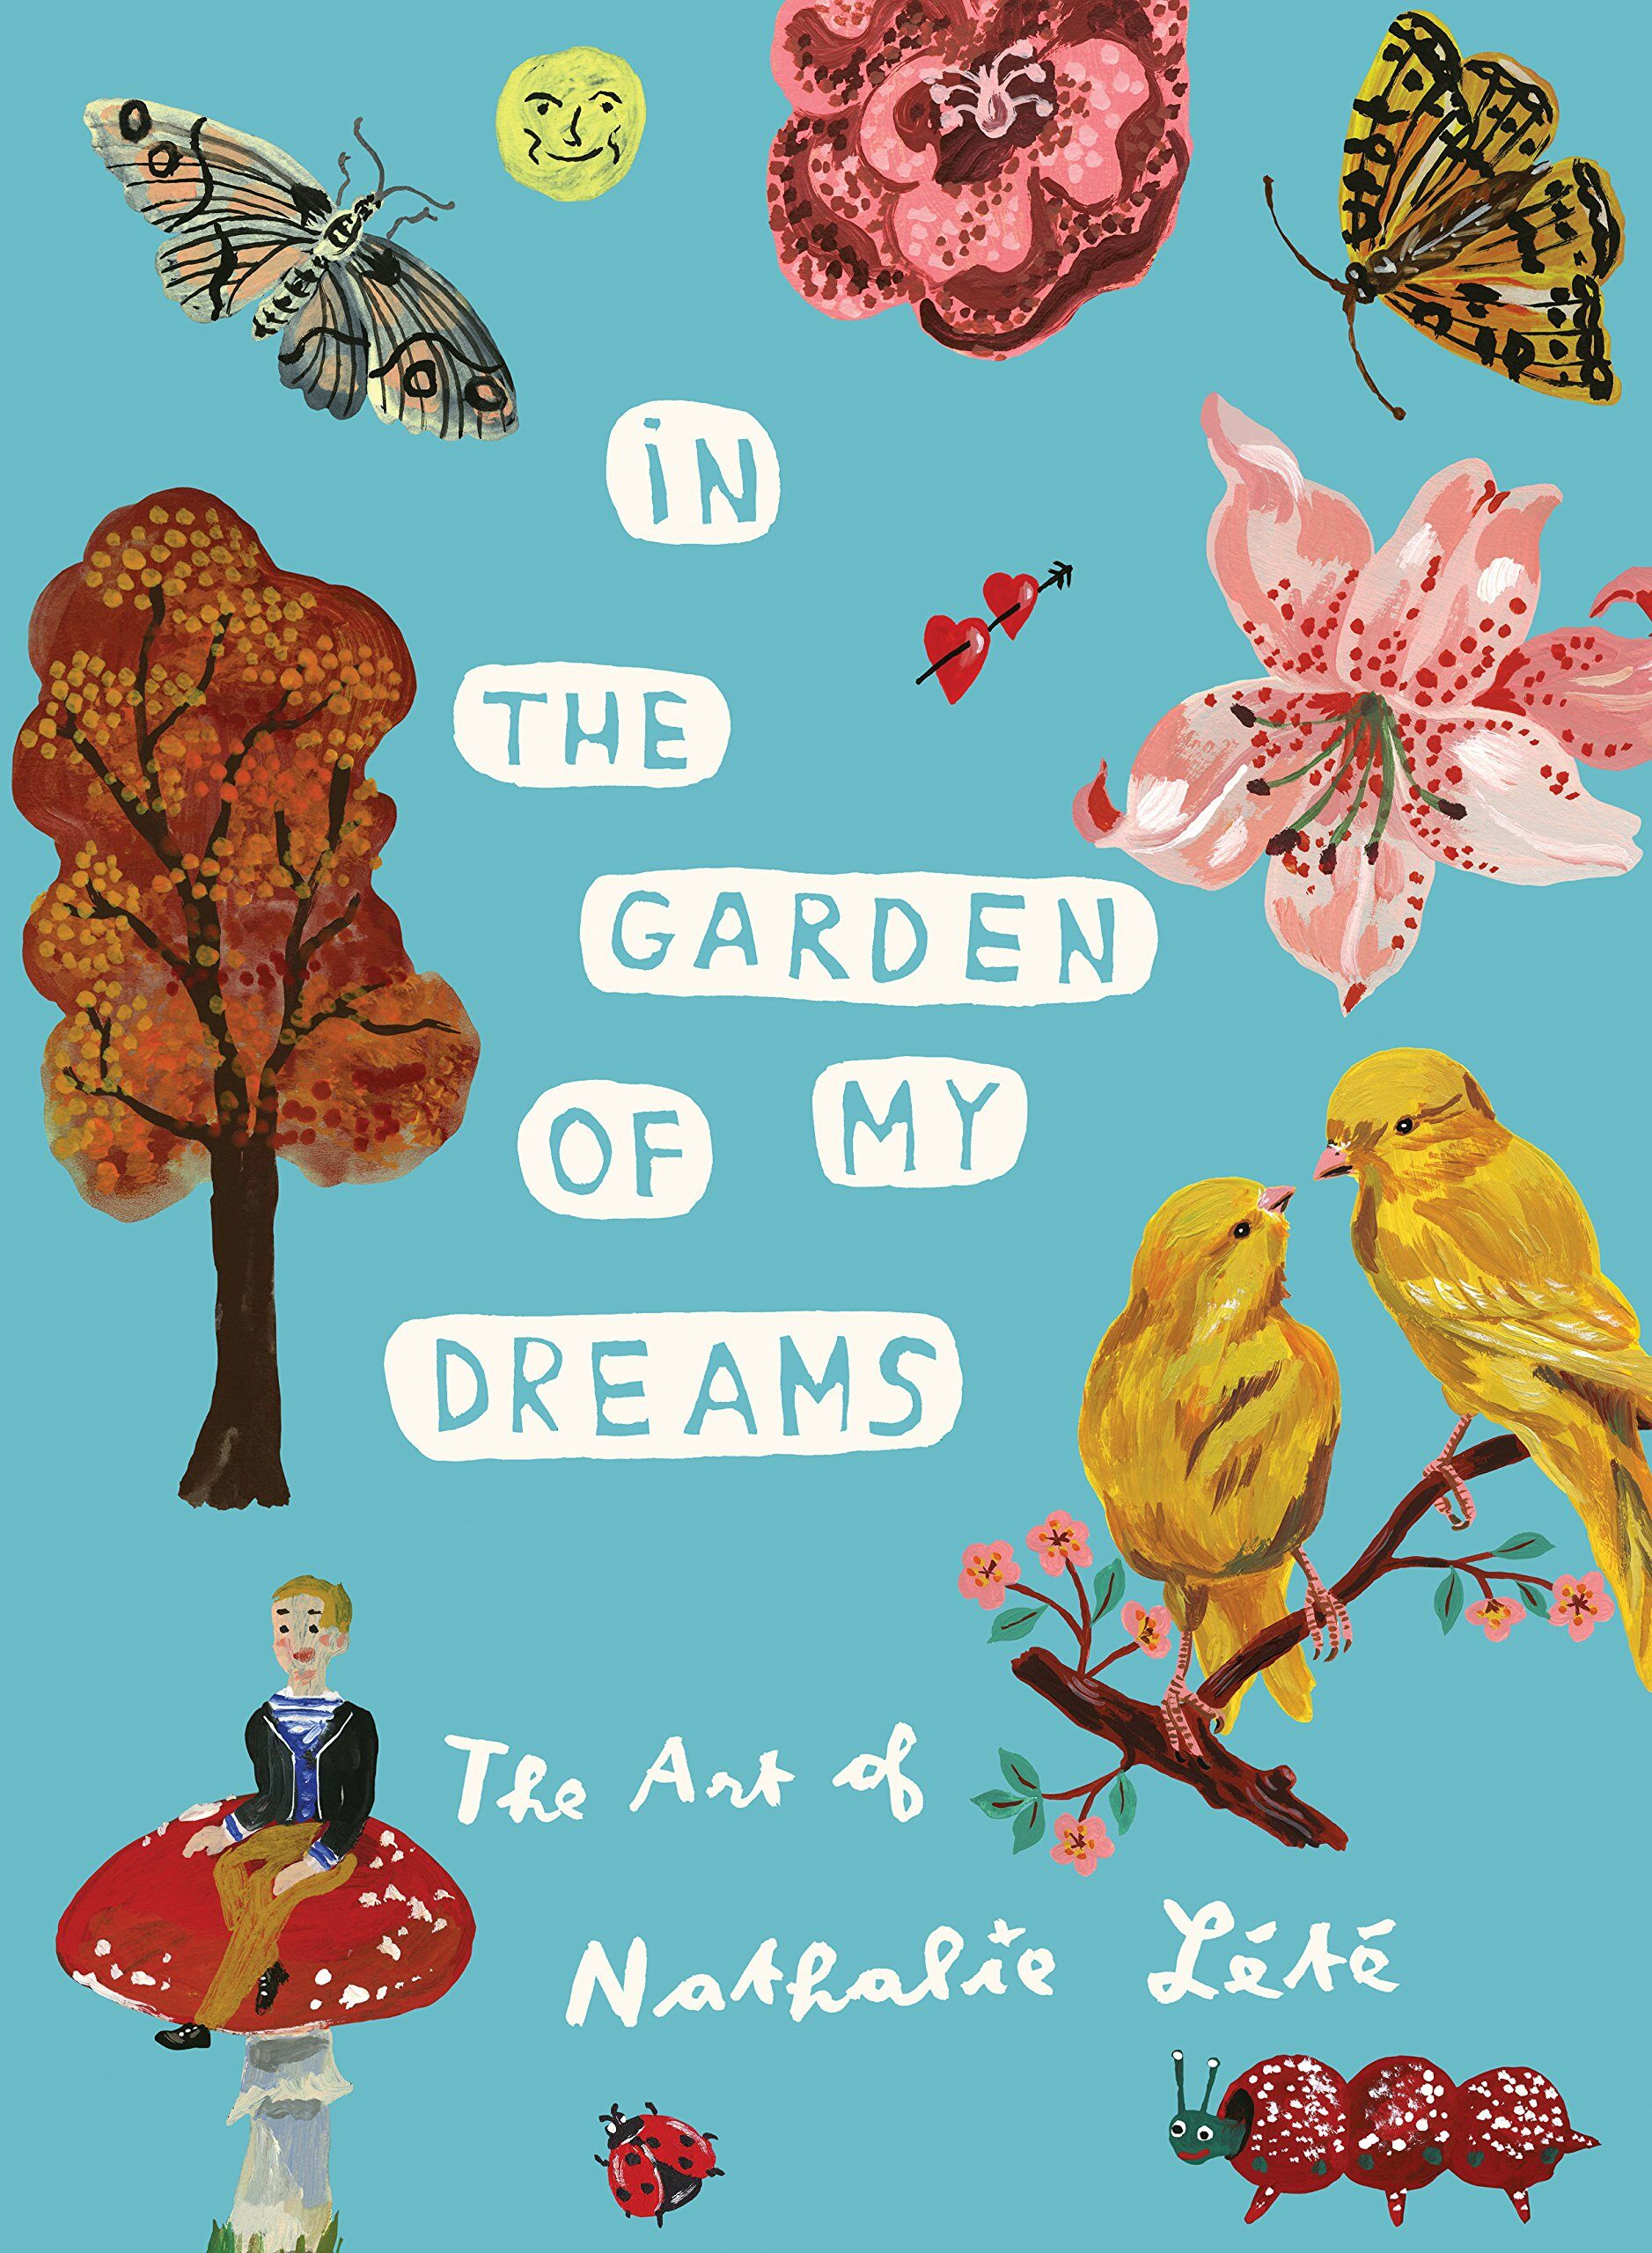 In the Garden of My Dreams: The Art of Nathalie L?? (Hardcover)